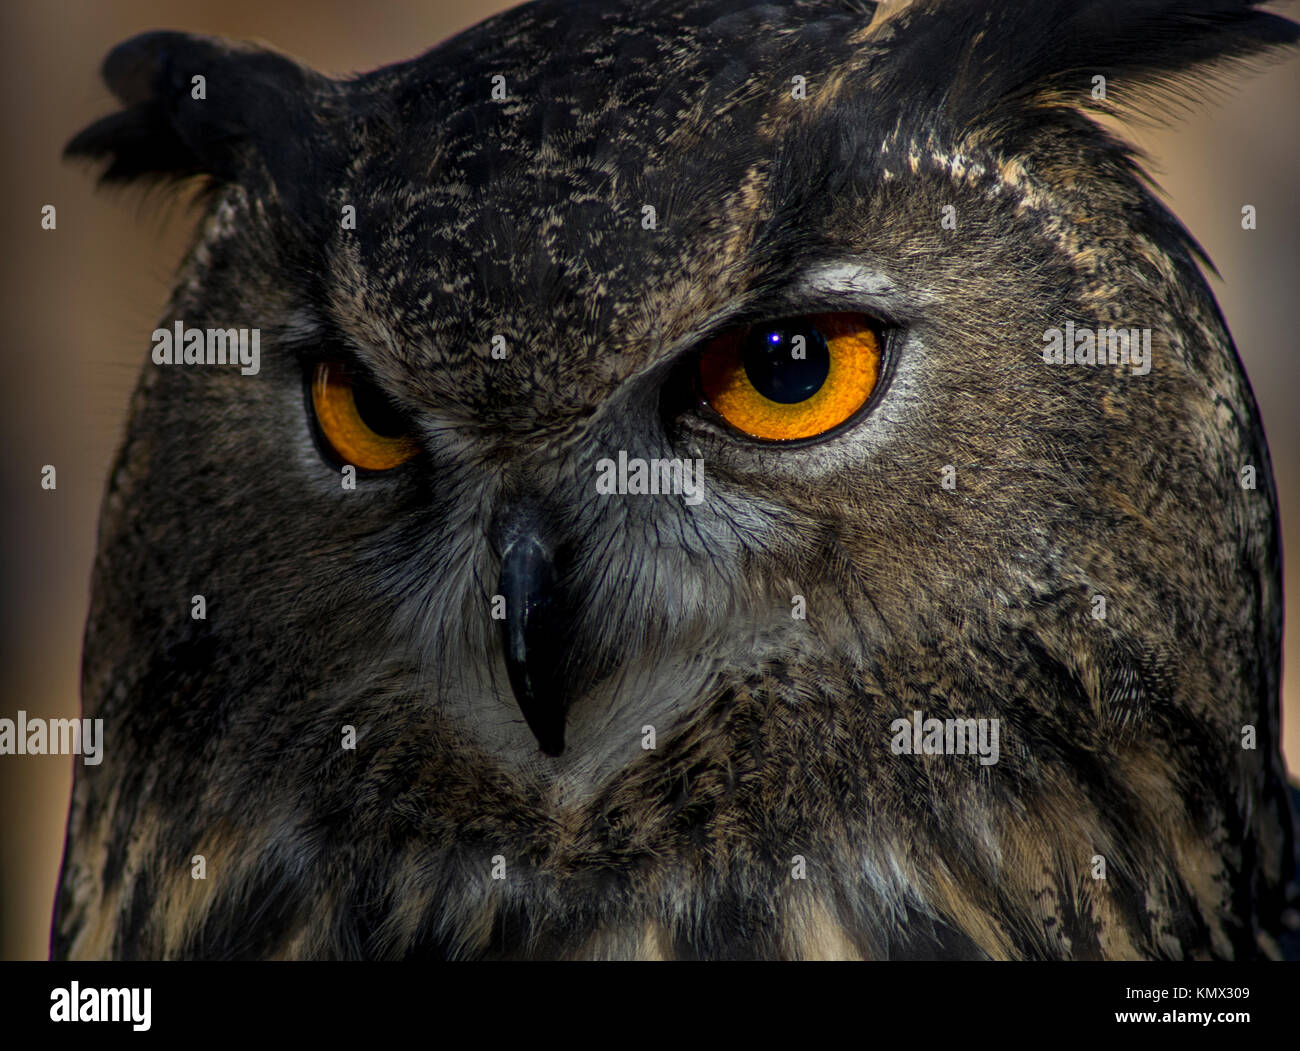 Great Horned Owl Bird, Bubo Virginianus, Portrait, Close up, with Orange Eyes, Feather Detail, and a Tan Blurry Background Stock Photo